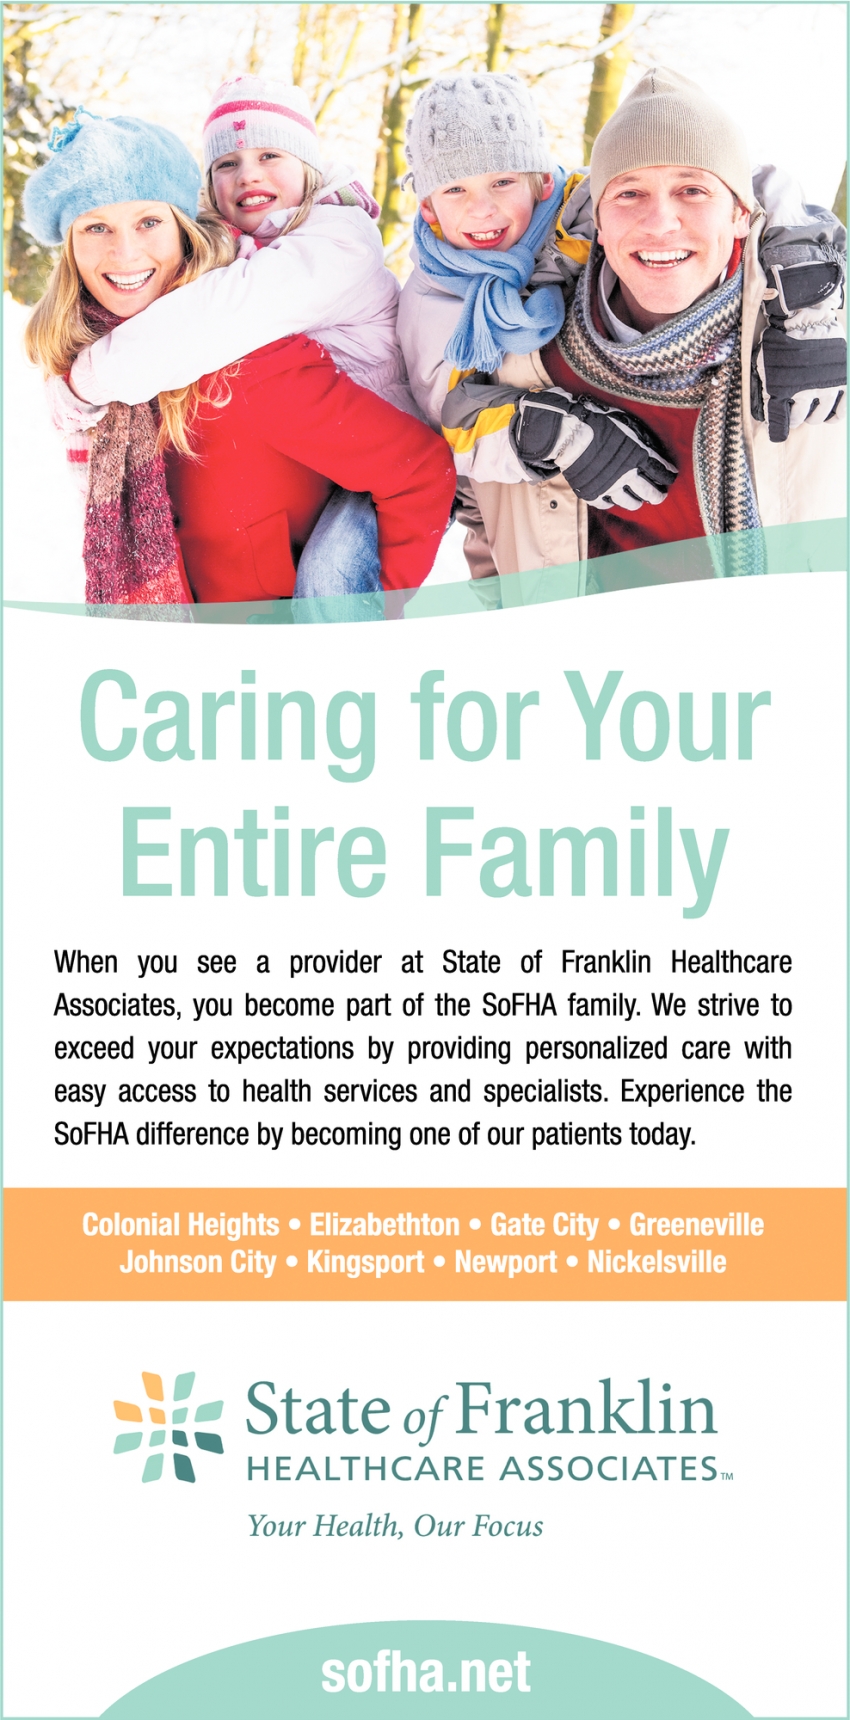 Caring for Your Entire Family